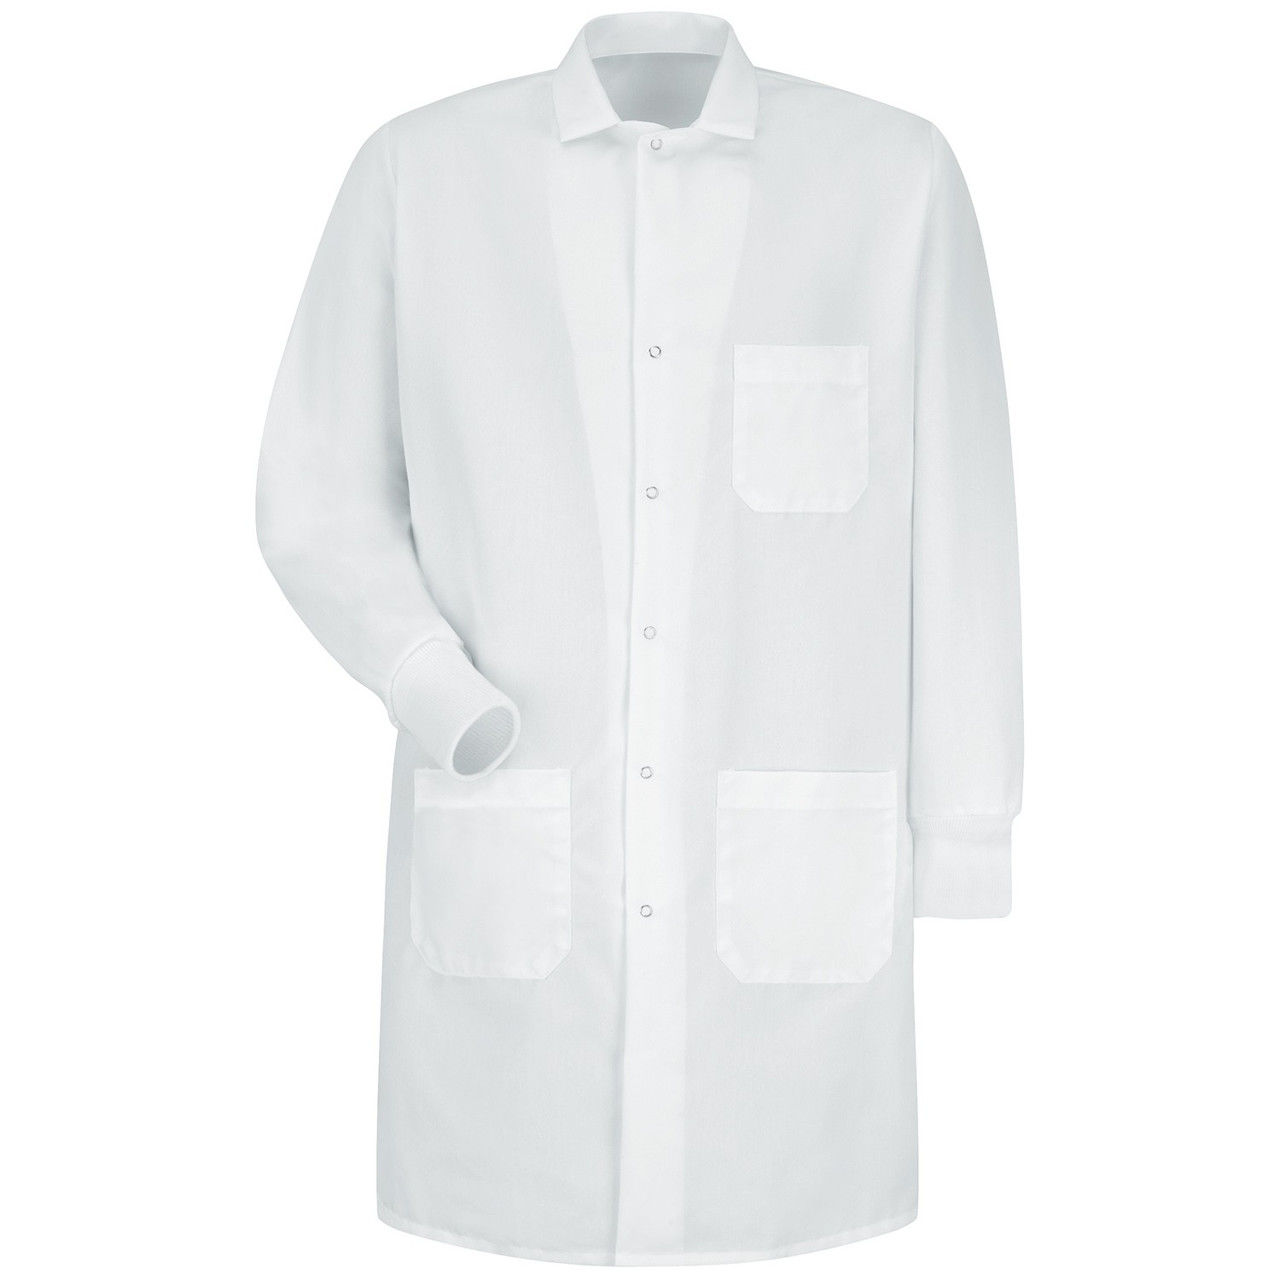 Is the lab coat with cuffed sleeves true to size?